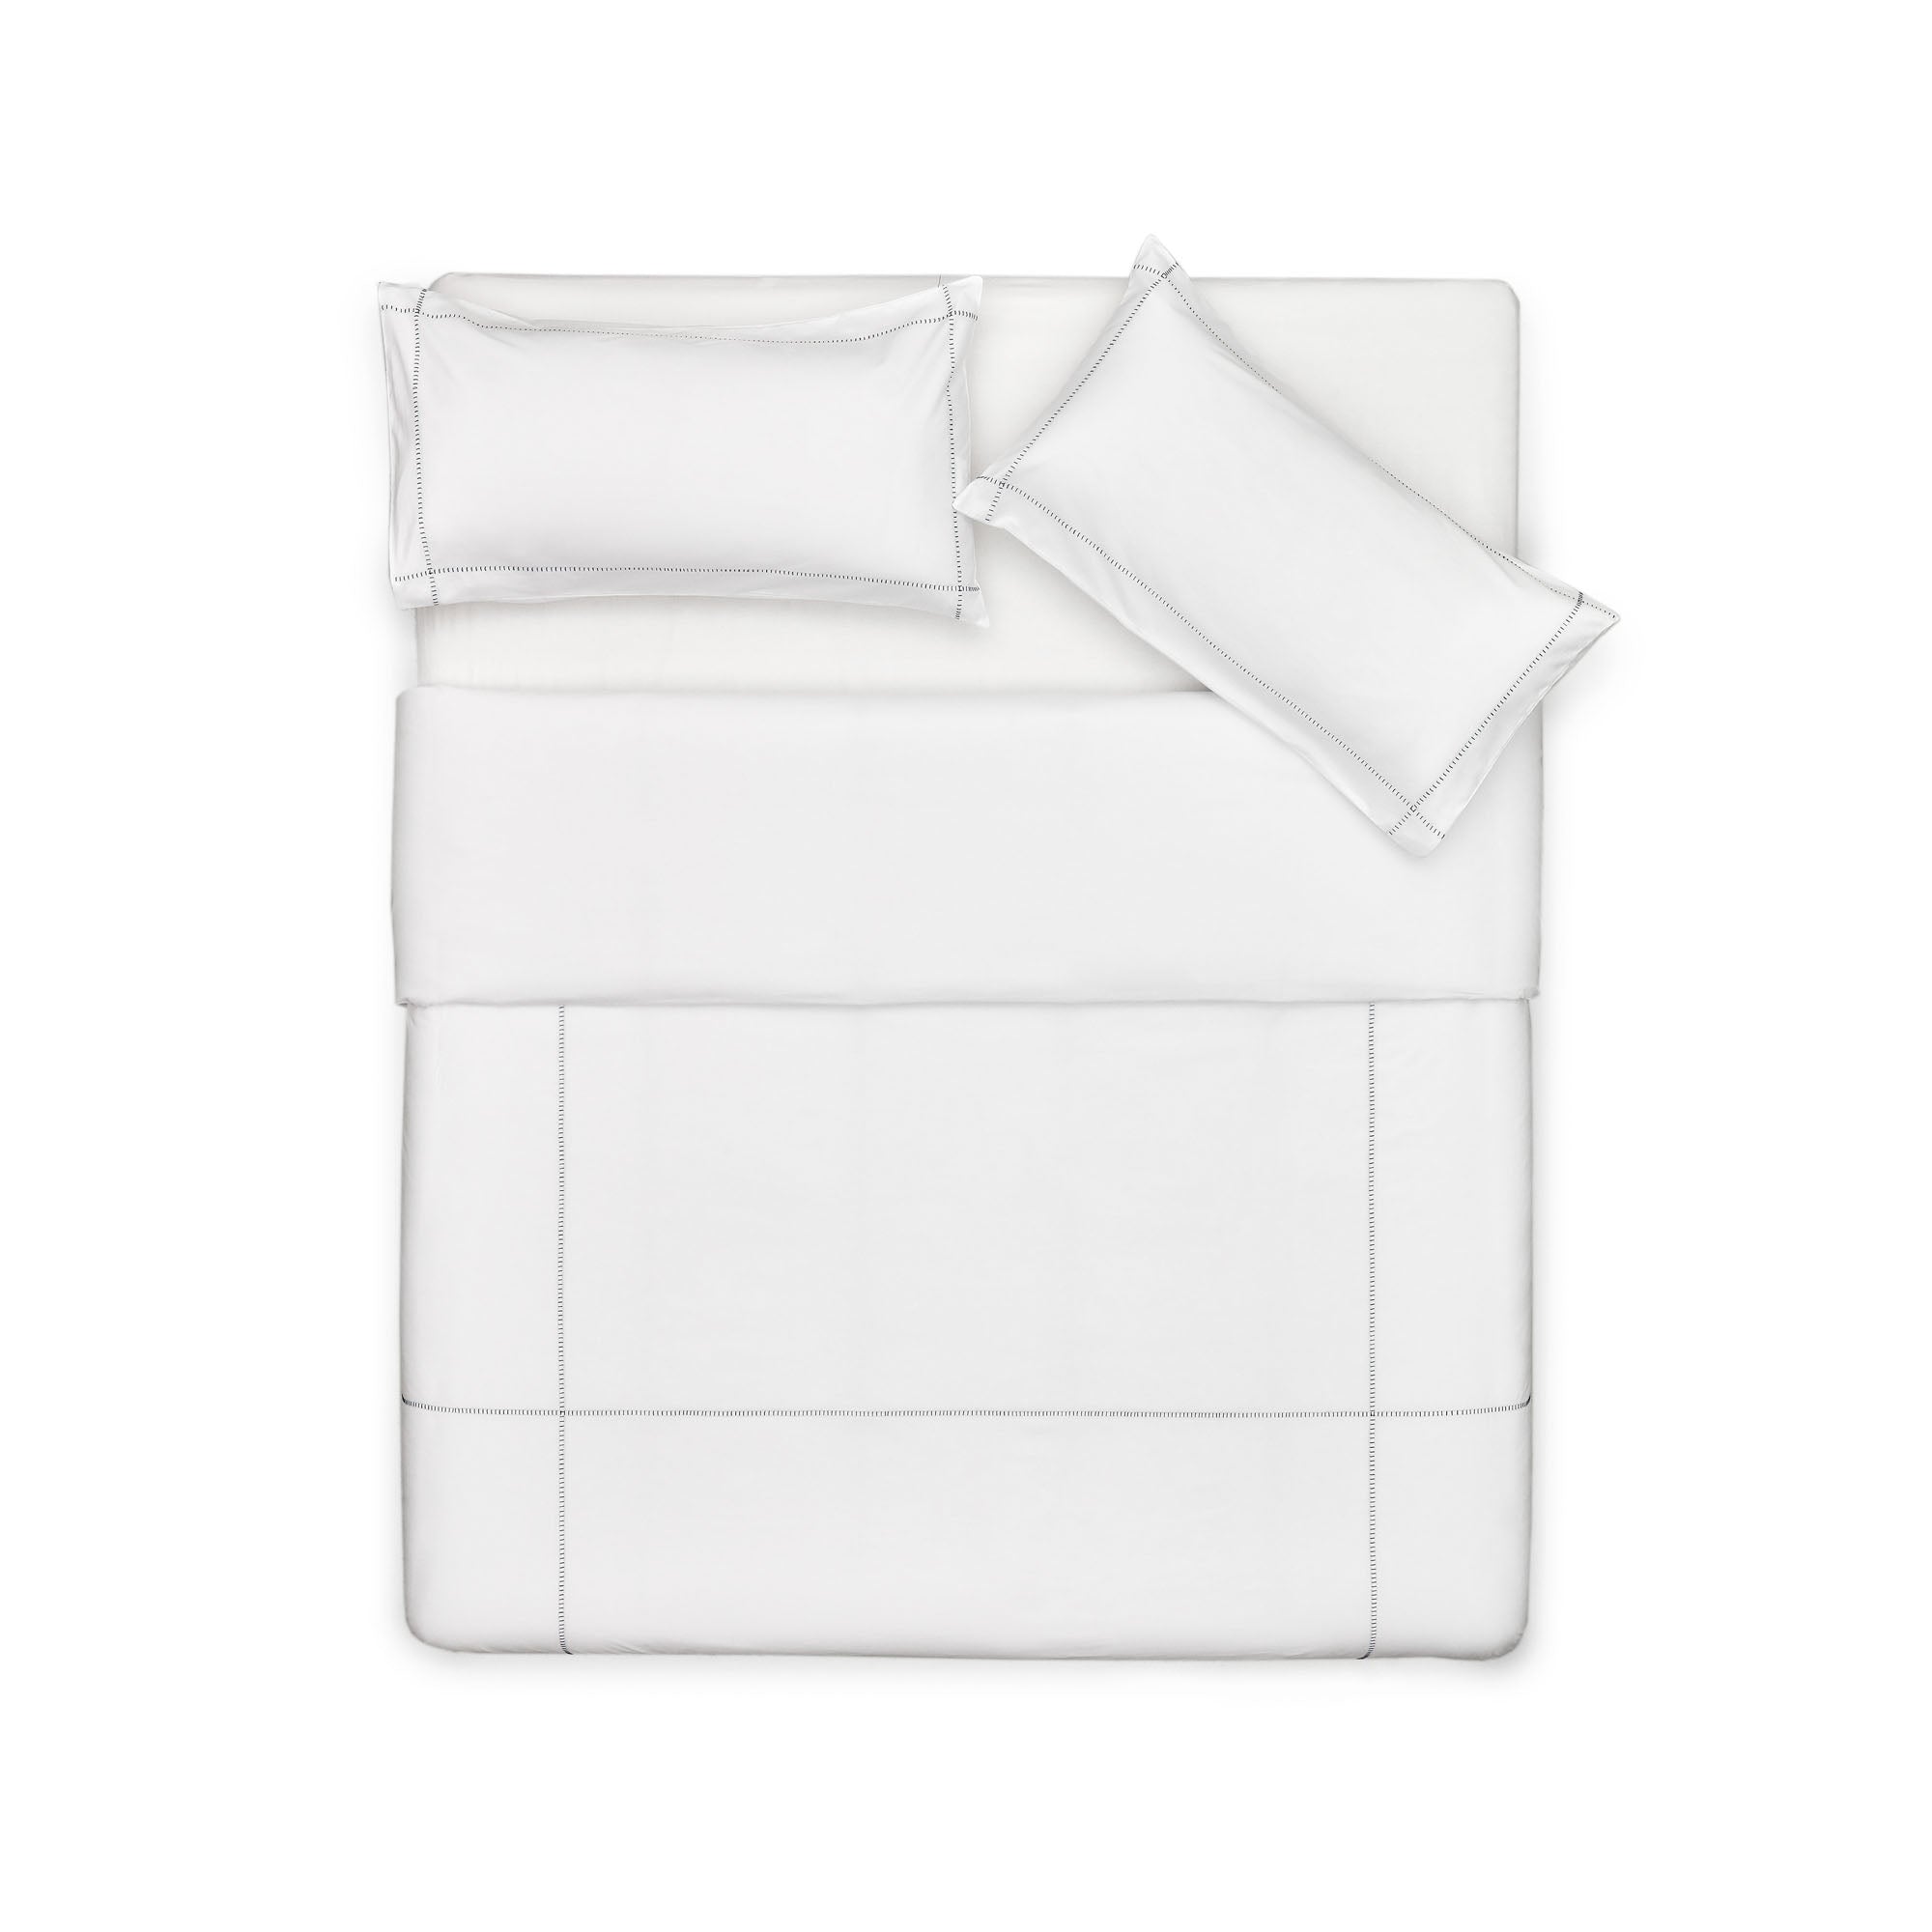 Elvia 100% cotton percale duvet cover and pillow case set, 180 thread count in white, 150 x 200cm